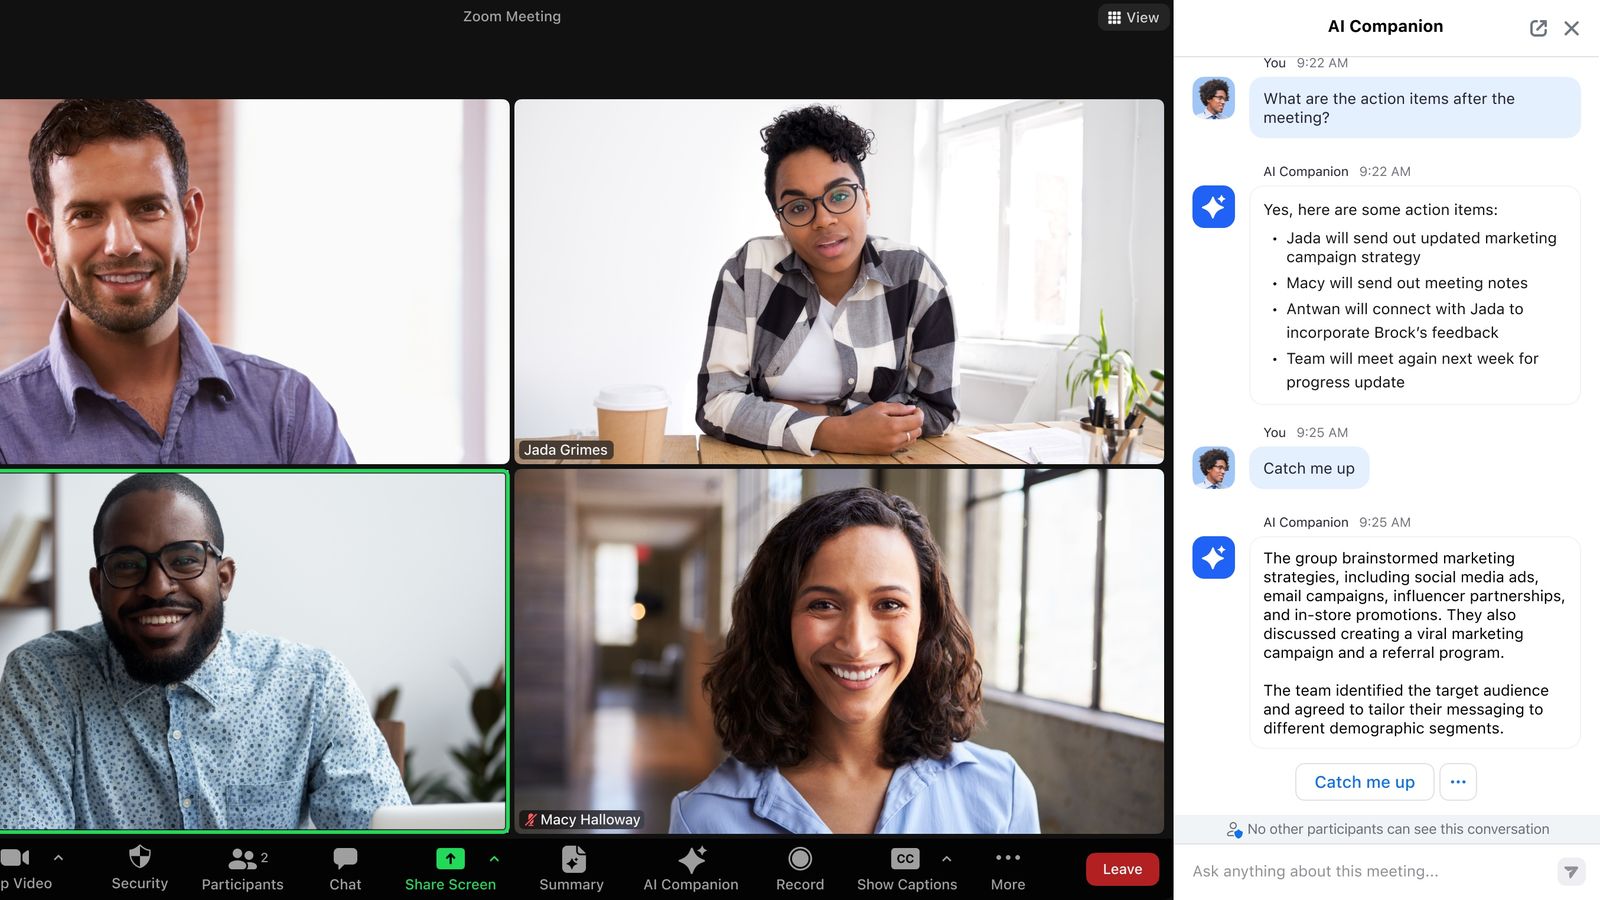 Zoom's new assistant brings more AI to your meetings